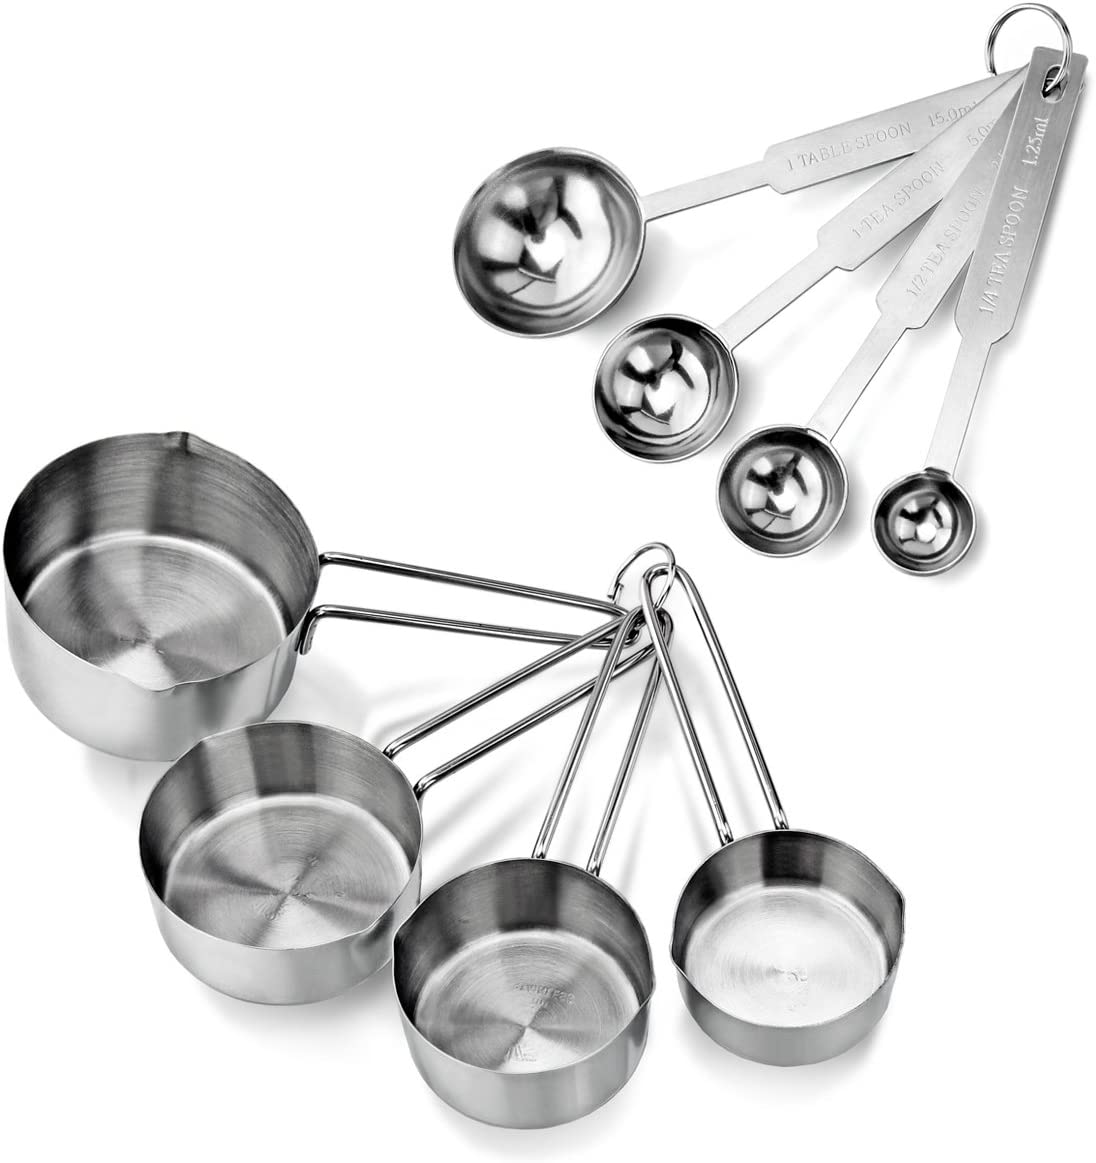 Cook with Color 8-Piece Measuring Cups and Measuring Spoon Set - Stainless Steel Liquid Measuring Cup Set or Dry Measuring Cups Set (Black)